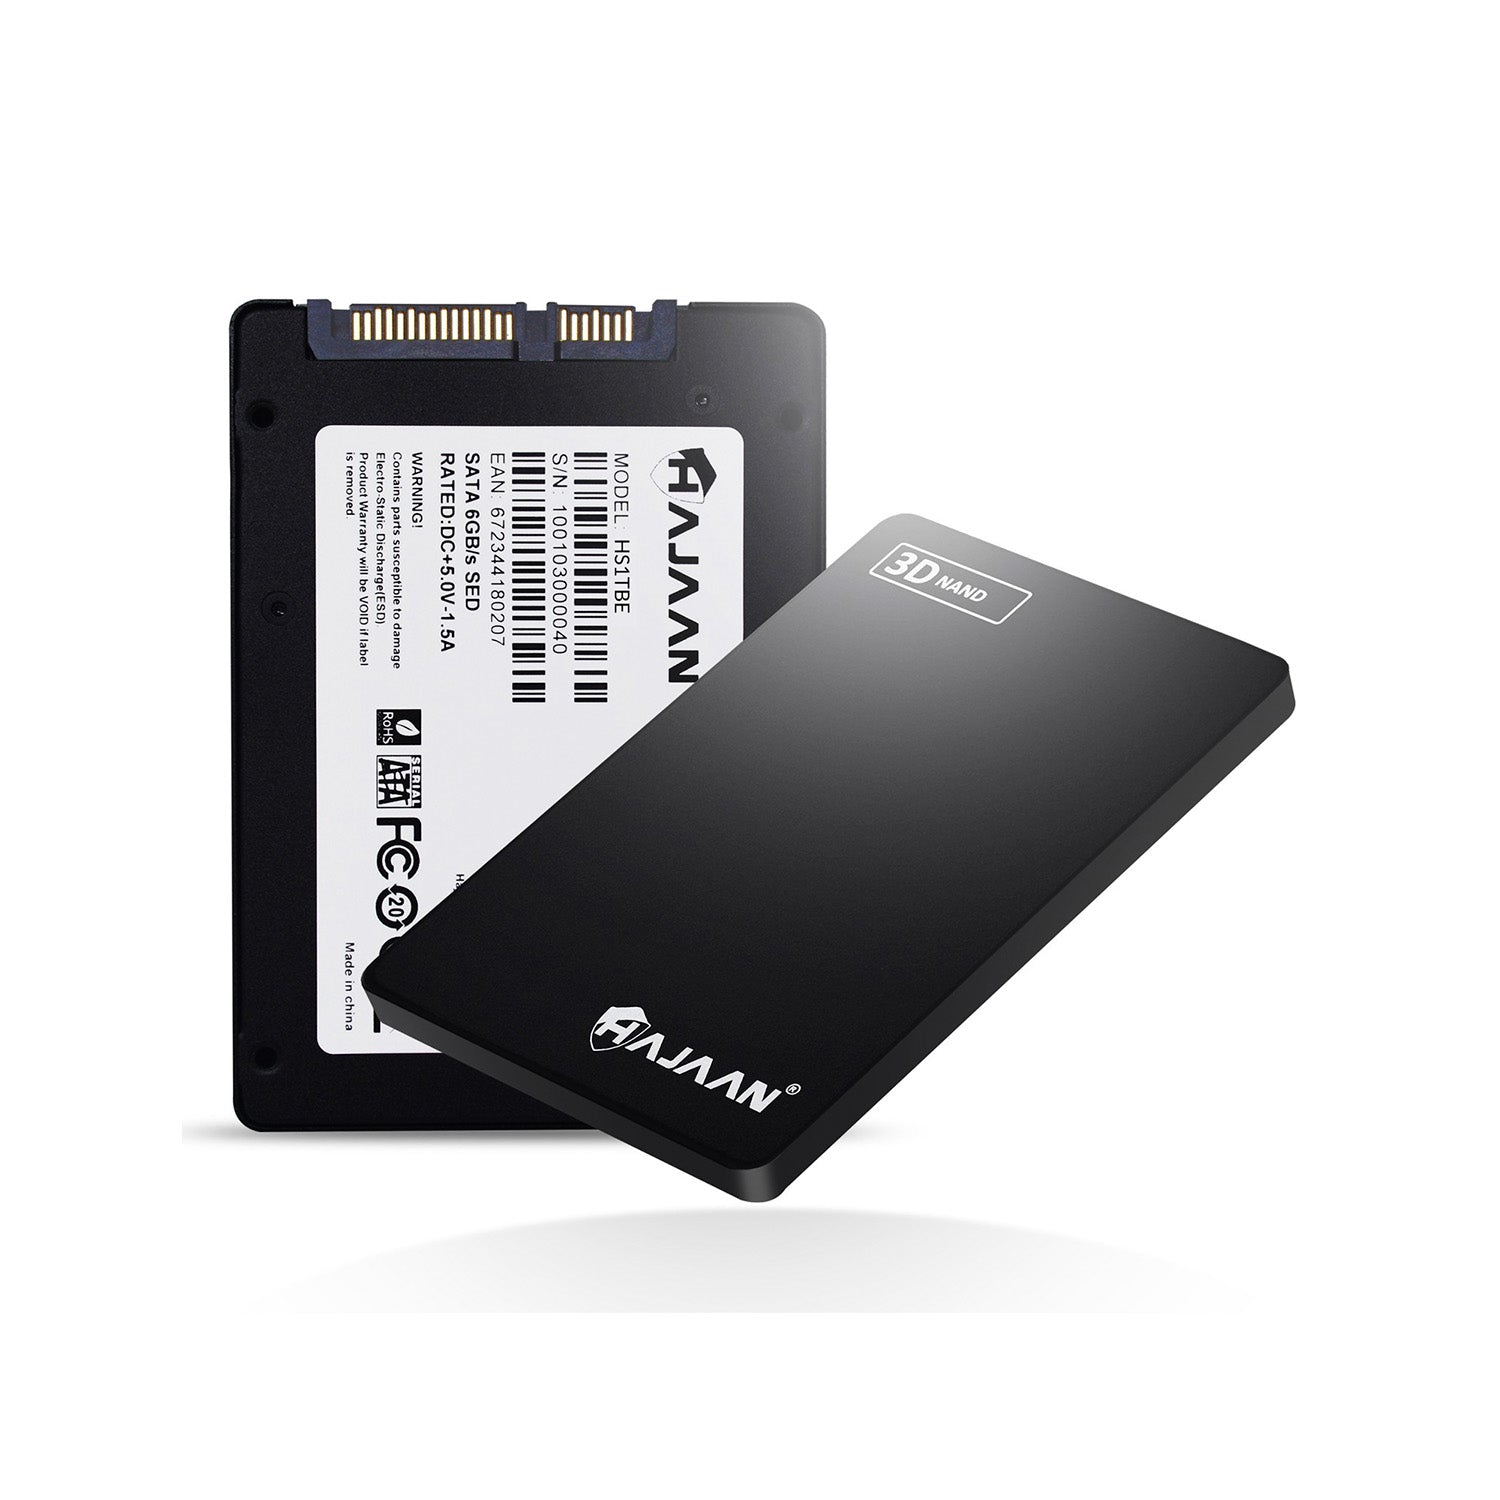 HAJAAN 1 TB Internal PC SSD- SATA III 6 Gb/s, 3D NAND TLC, 2.5”, Up to 550MB/s, Internal Solid State Drive for Laptop Tablet PC Desktop,1 year warranty